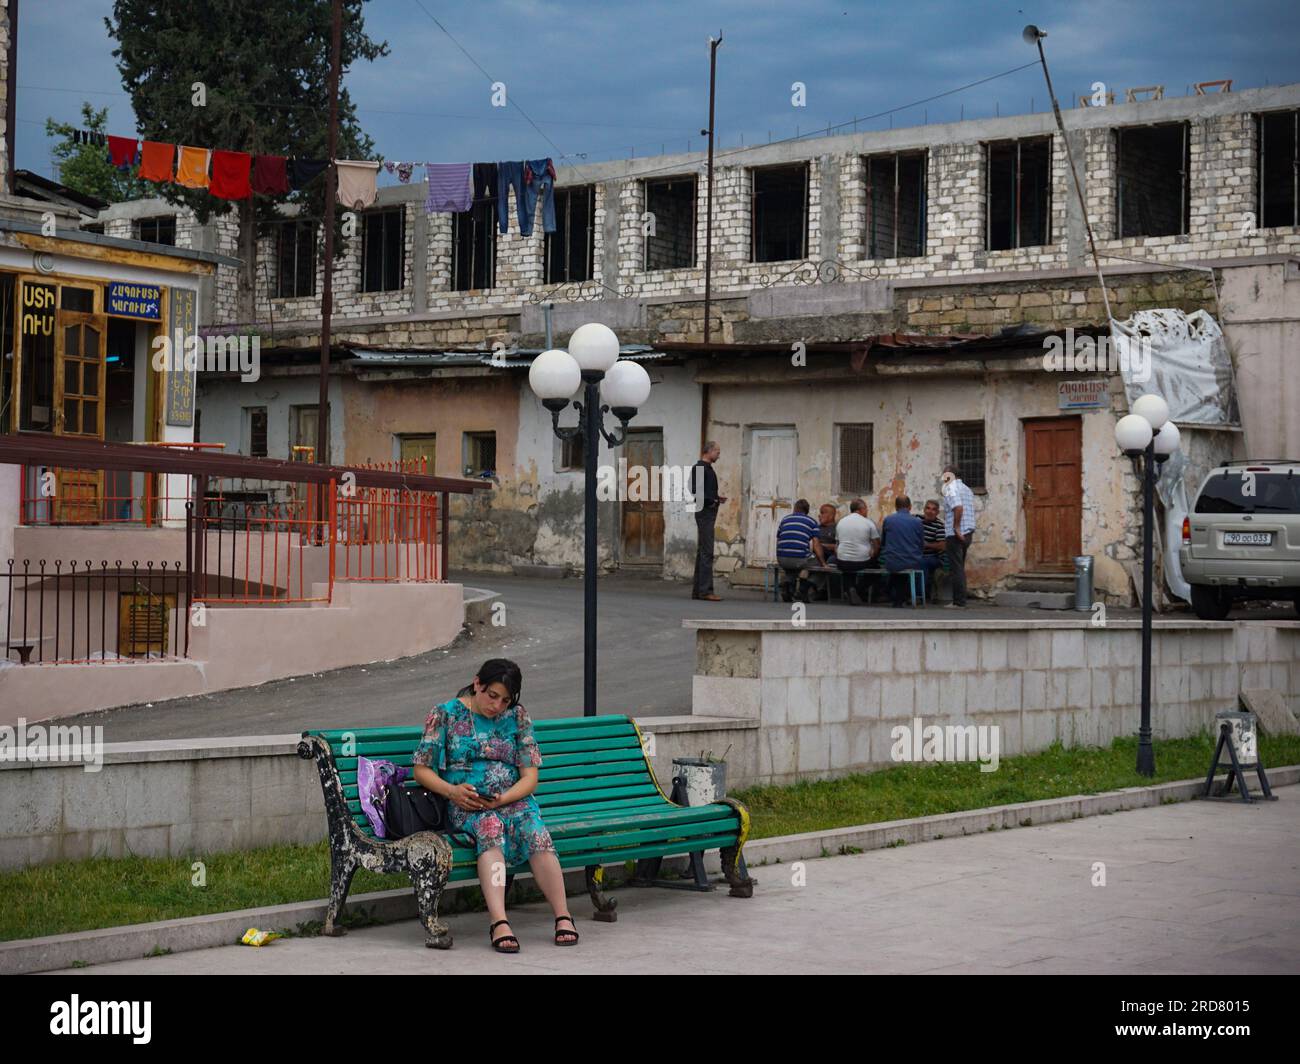 Locals seen outside Artsakh State University in Stepanakert, Nagorno-Karabakh. The unrecognised yet de facto independent country in South Caucasus, Nagorno-Karabakh (also known as Artsakh) has been in the longest-running territorial dispute between Azerbaijan and Armenia in post-Soviet Eurasia since the collapse of Soviet Union. It is mainly populated by ethnic Armenians. Stock Photo